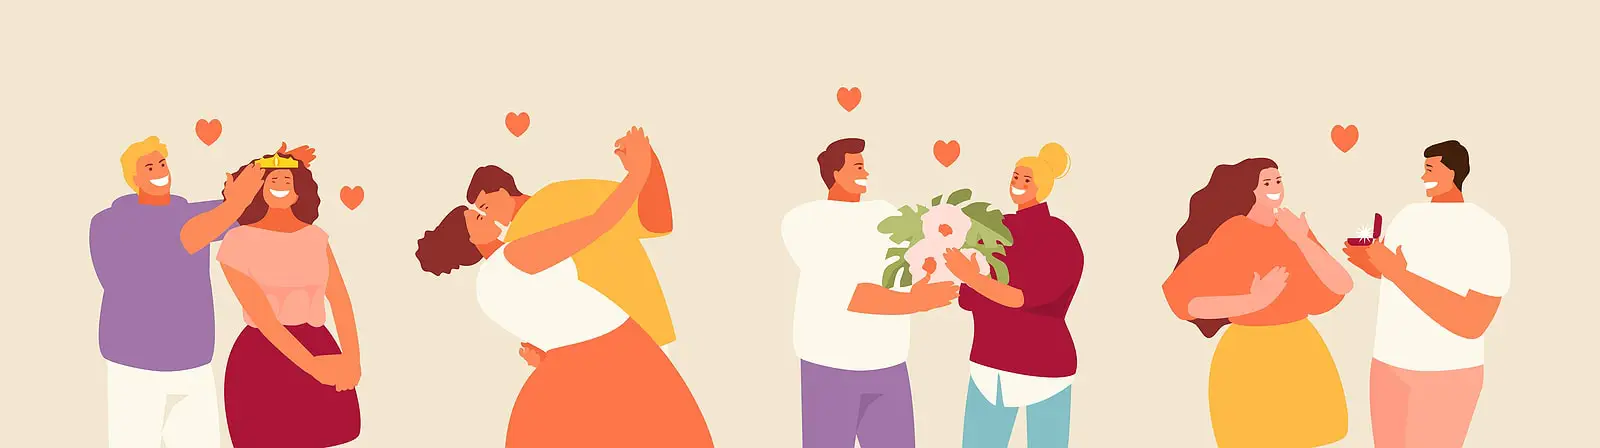 Illustration of 4 different couples in romantic situations